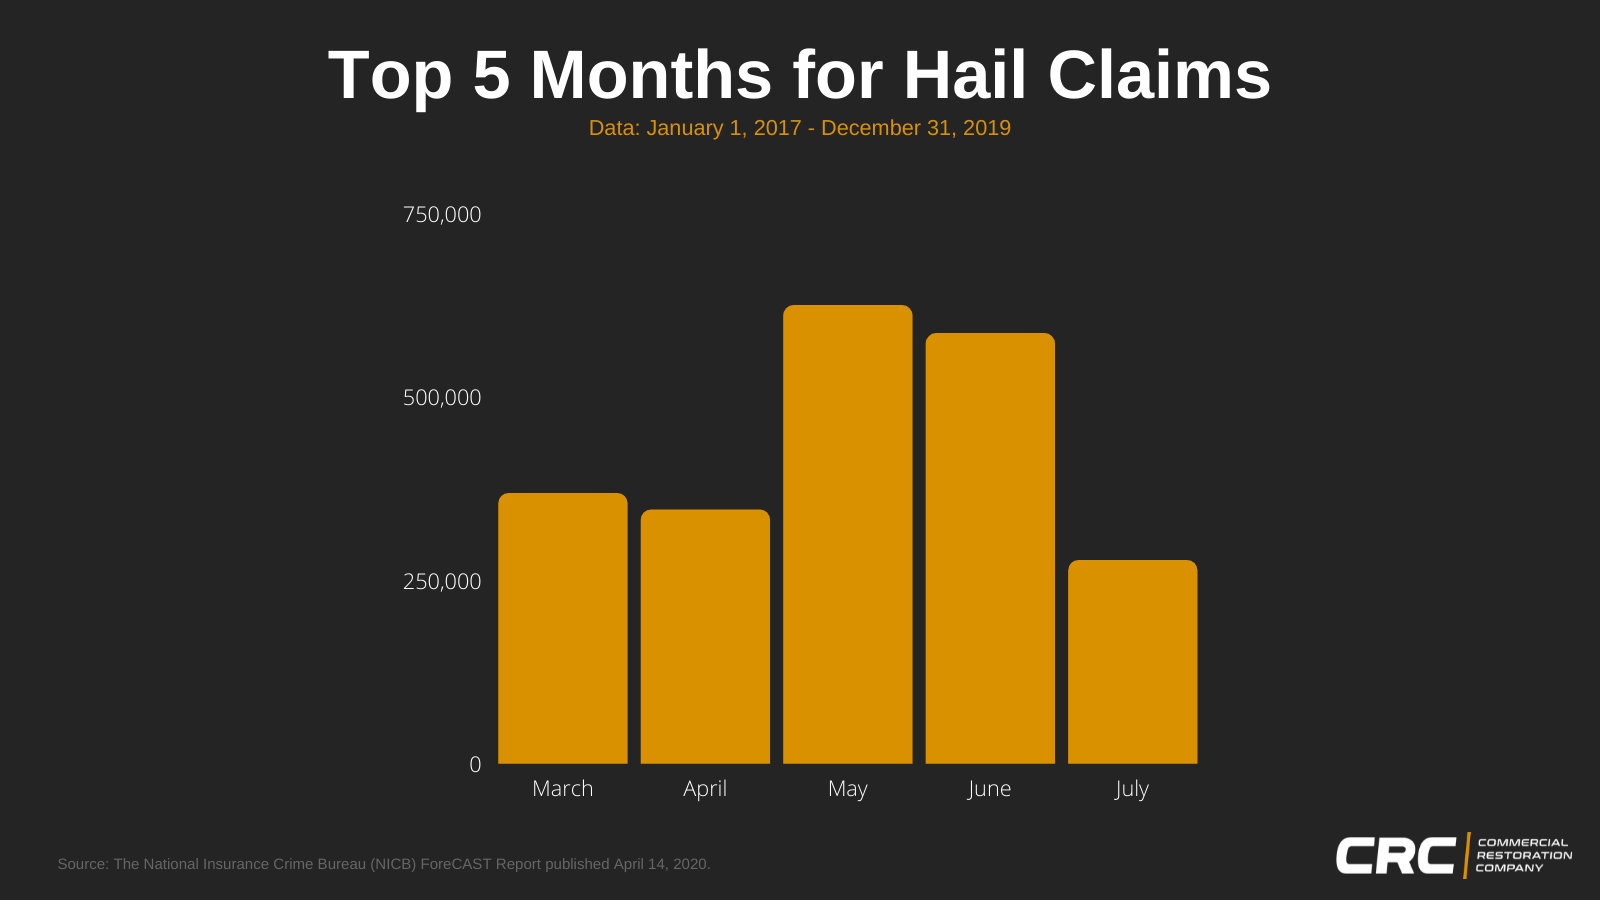 Top 5 months for hail damage